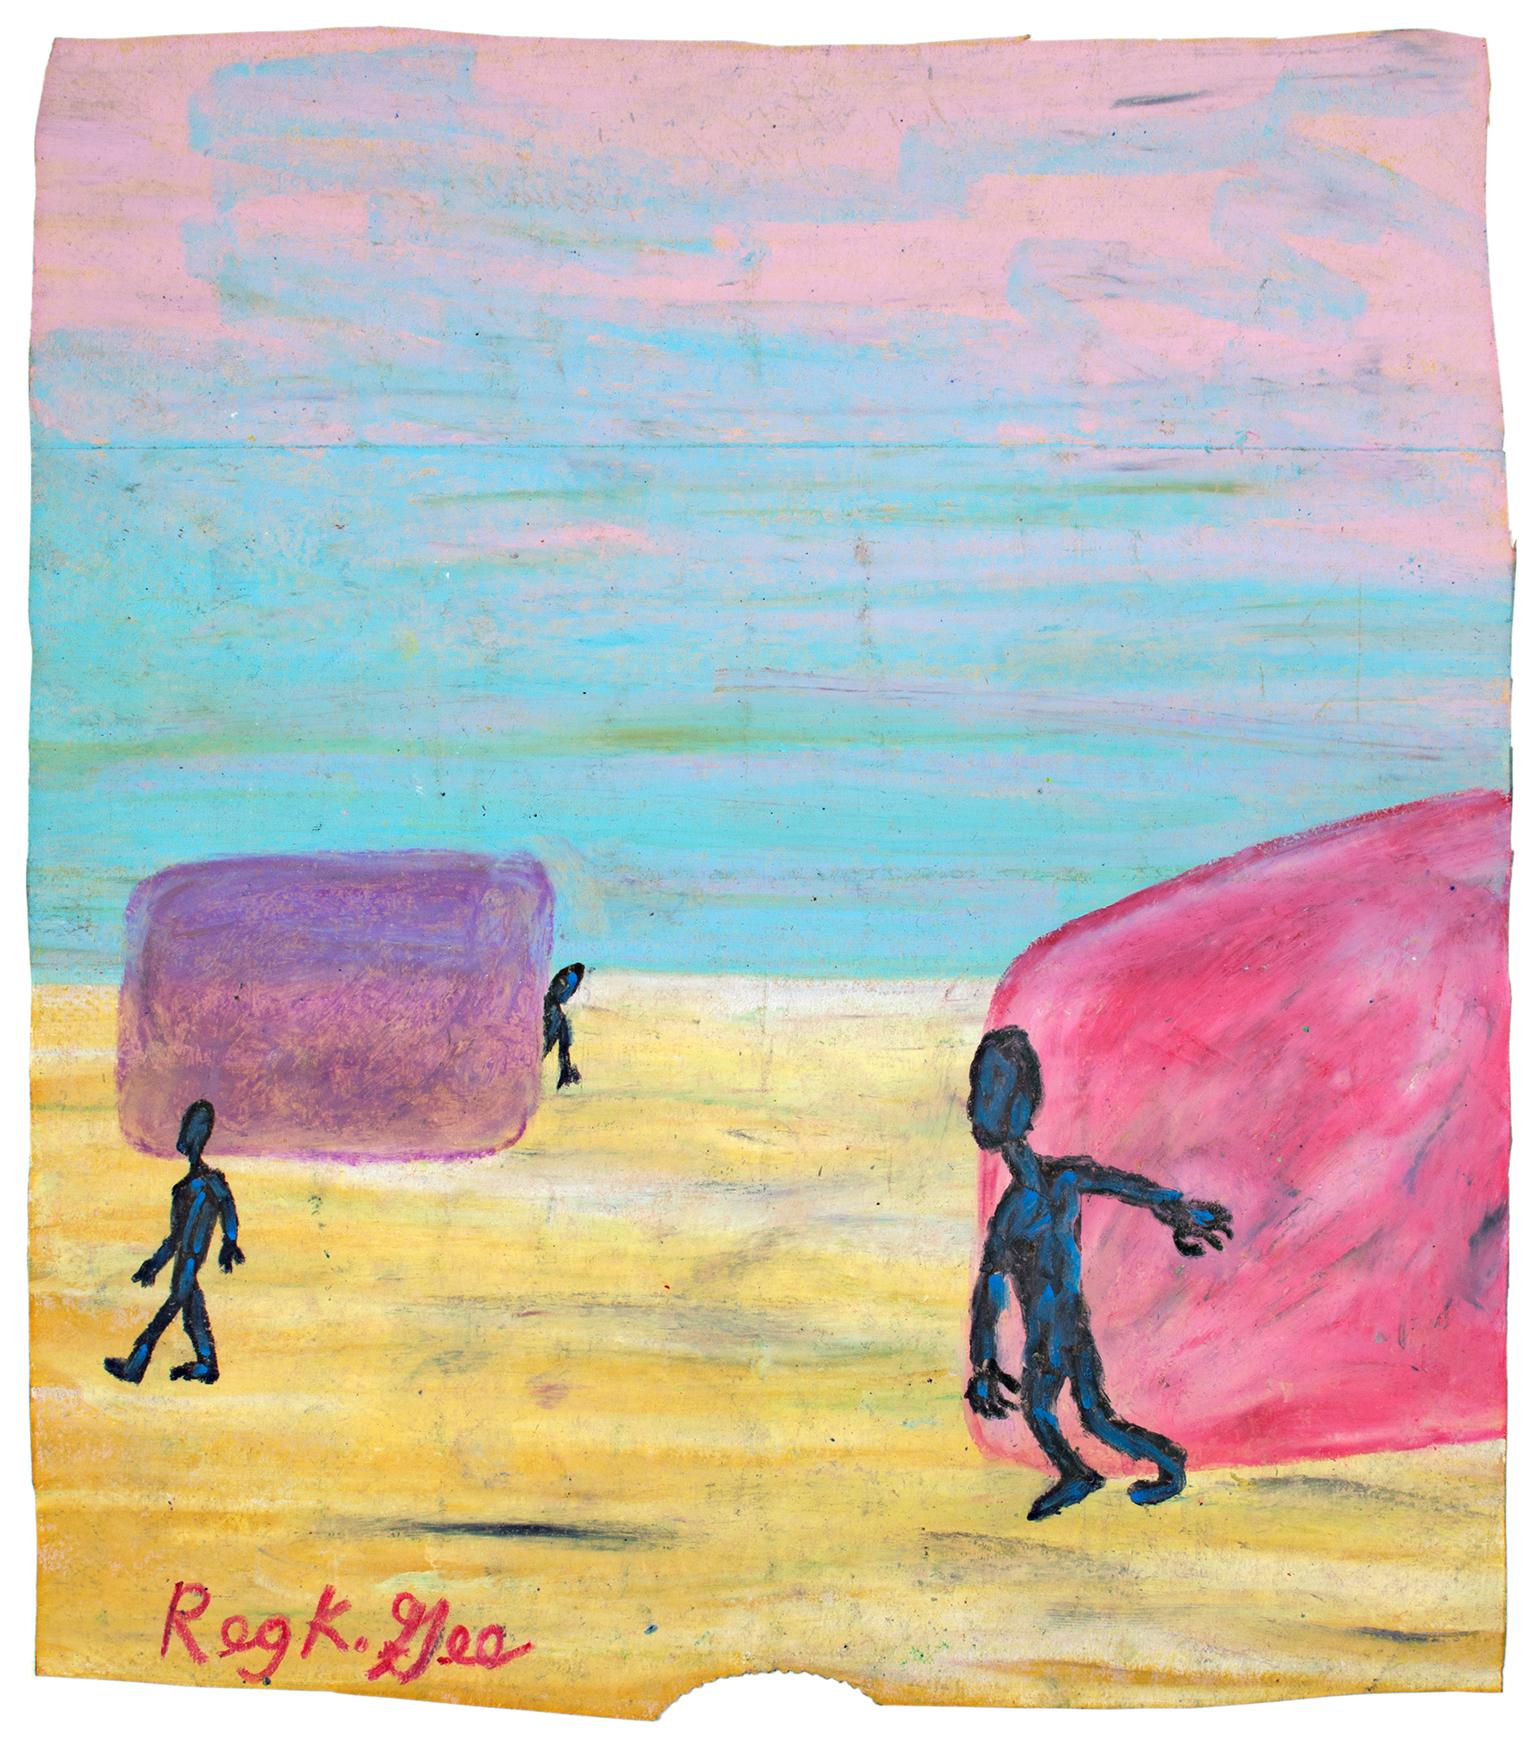 "Territory" is an original oil pastel drawing on grocery bag by Reginald K. Gee. The artist signed the piece lower left. It features a few shadowed figures peeking around abstract forms. 

13 1/4" x 12 1/8" art
Custom framing is available

Reginald